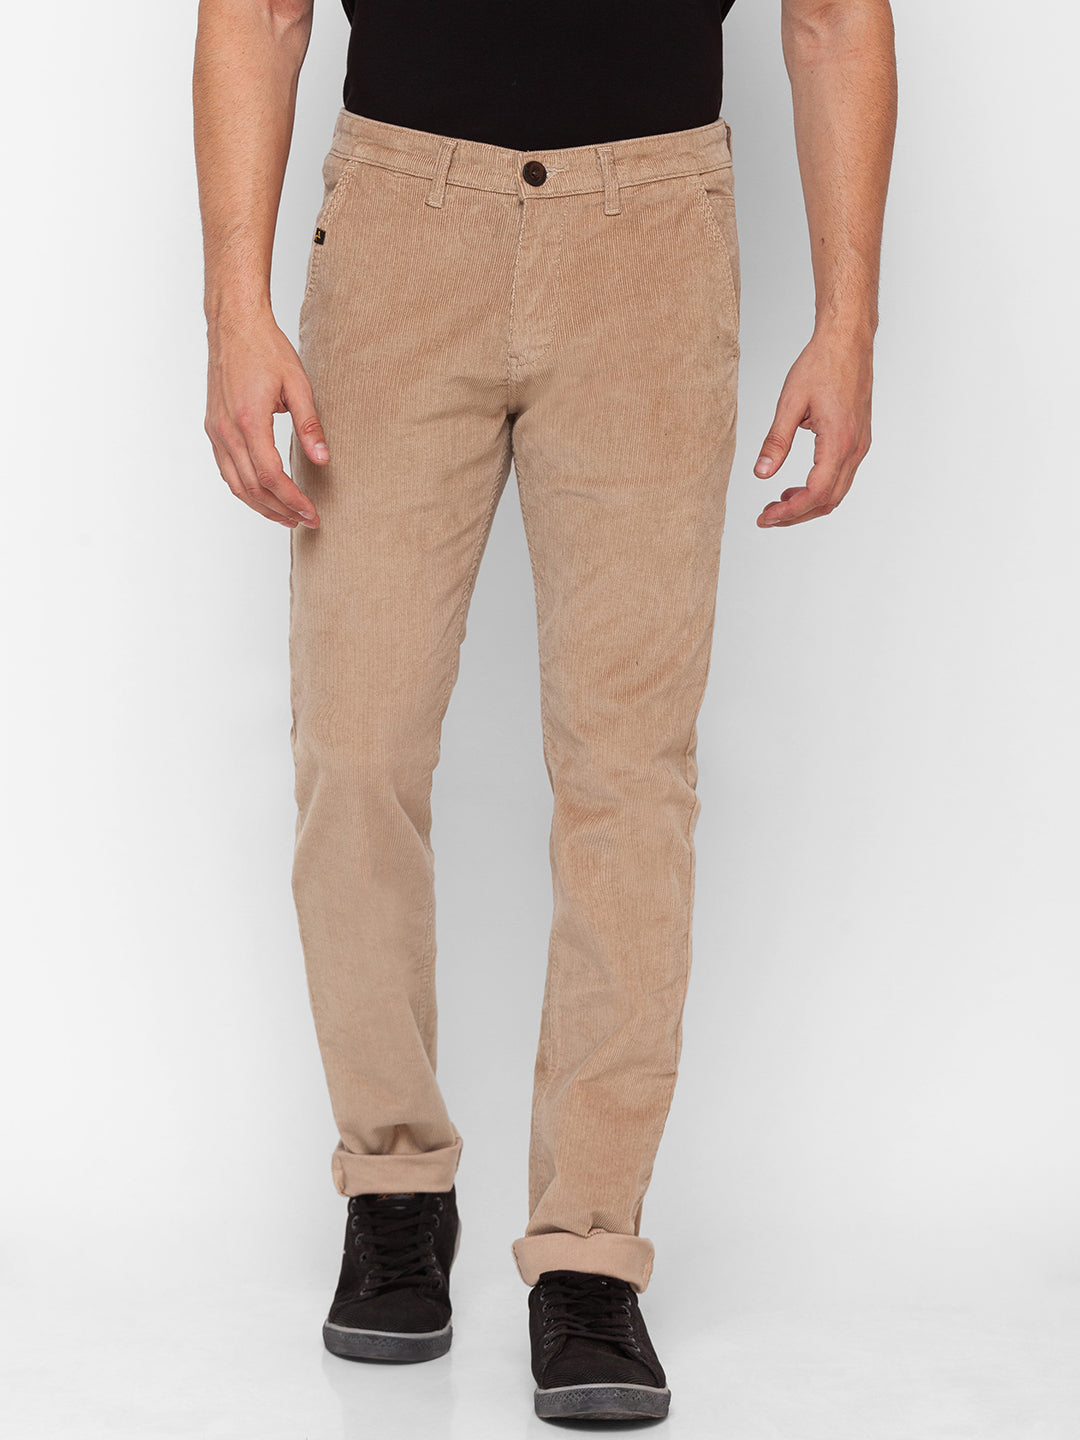 Navy Blue Men Casual Trousers The Indian Garage Co - Buy Navy Blue Men Casual  Trousers The Indian Garage Co online in India